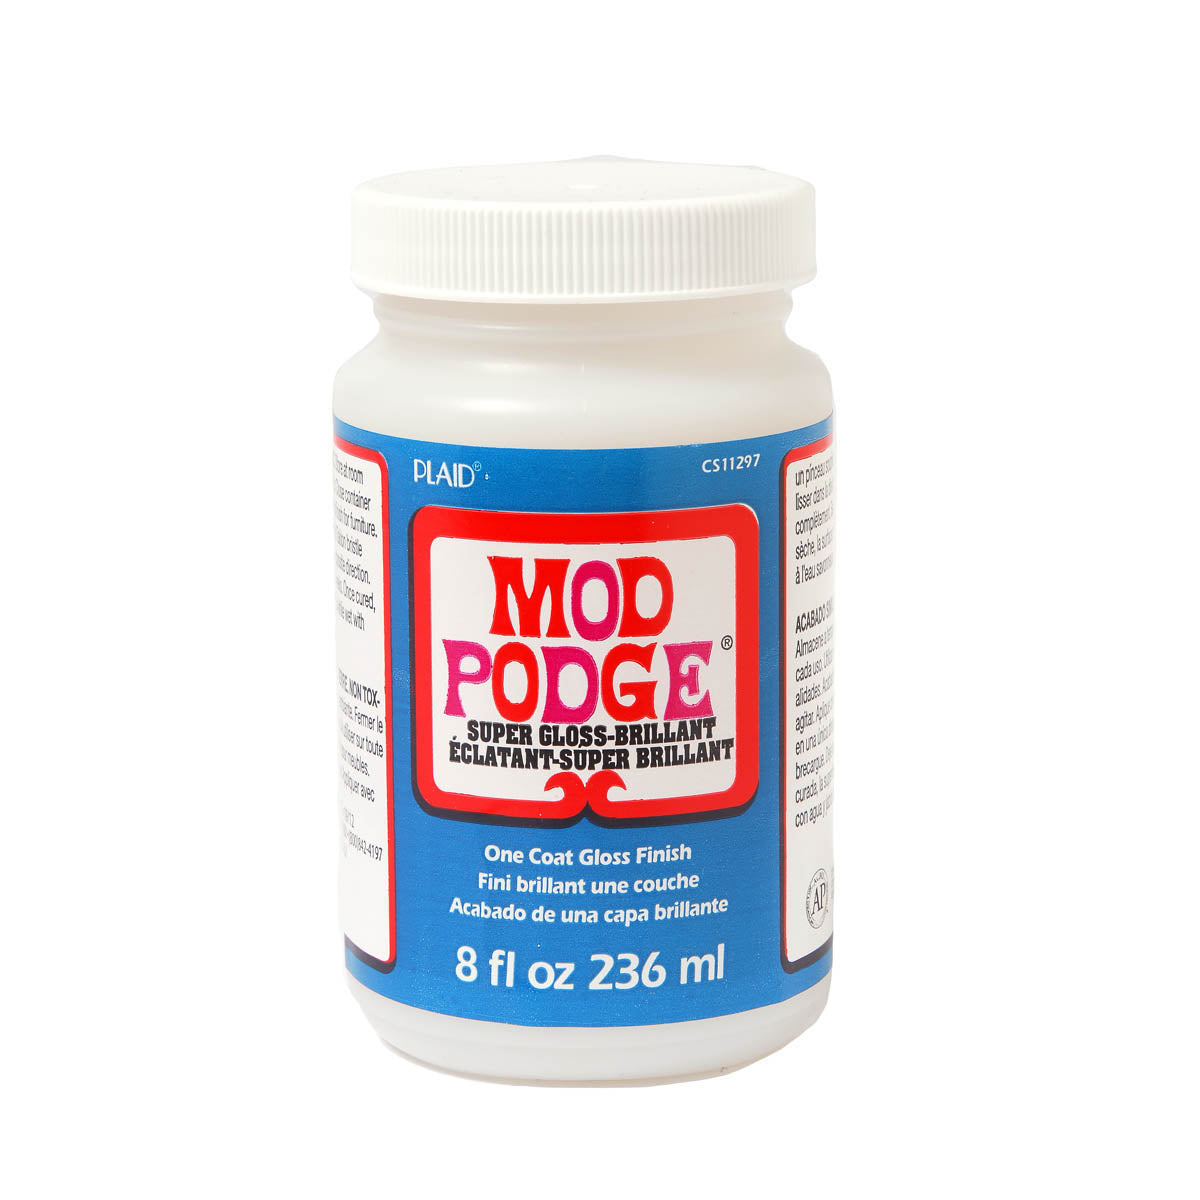 MOD PODGE (Choose from MATTE or GLOSS) Waterbase sealer glue